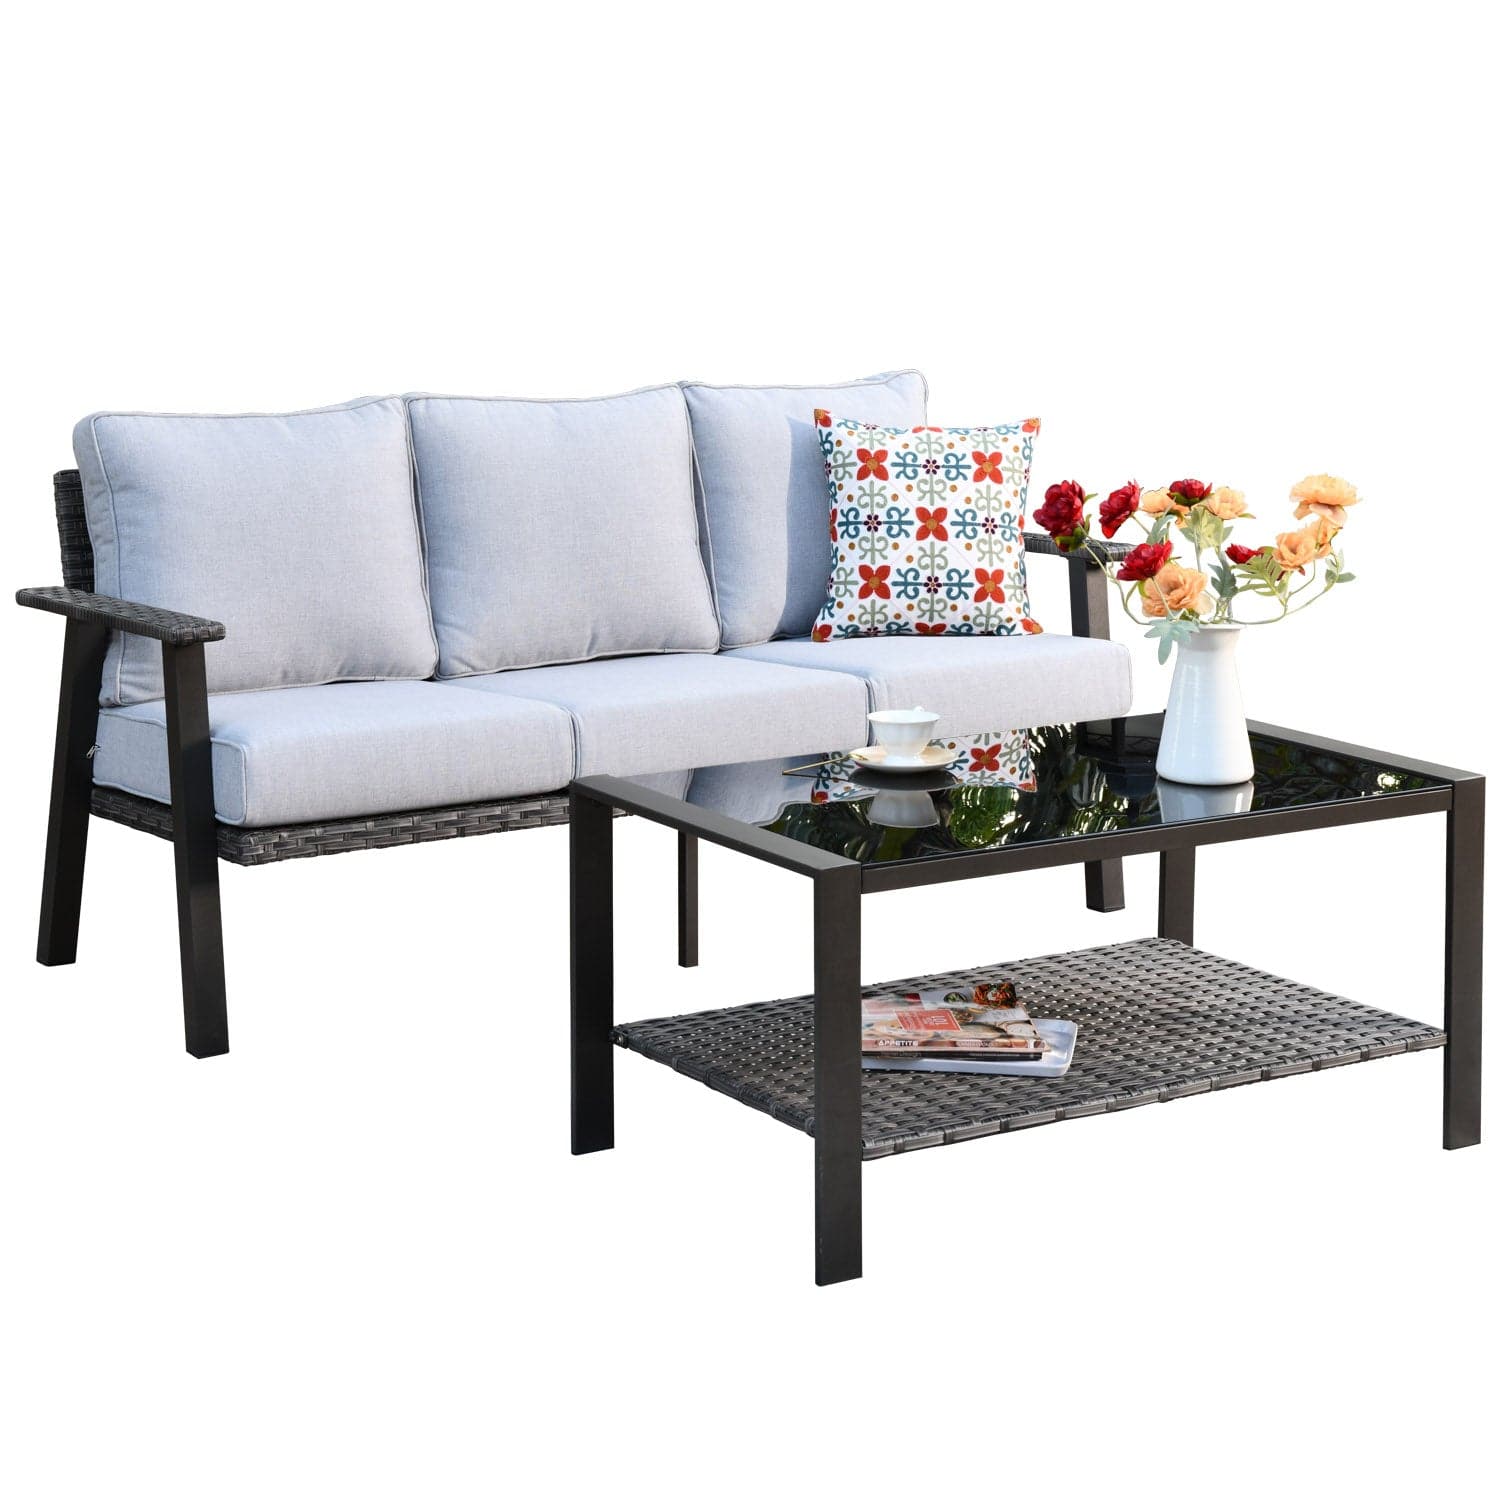 Ovios Outdoor Bistro Set with 5'' Cushion Couch and Table, Olefin Fabric